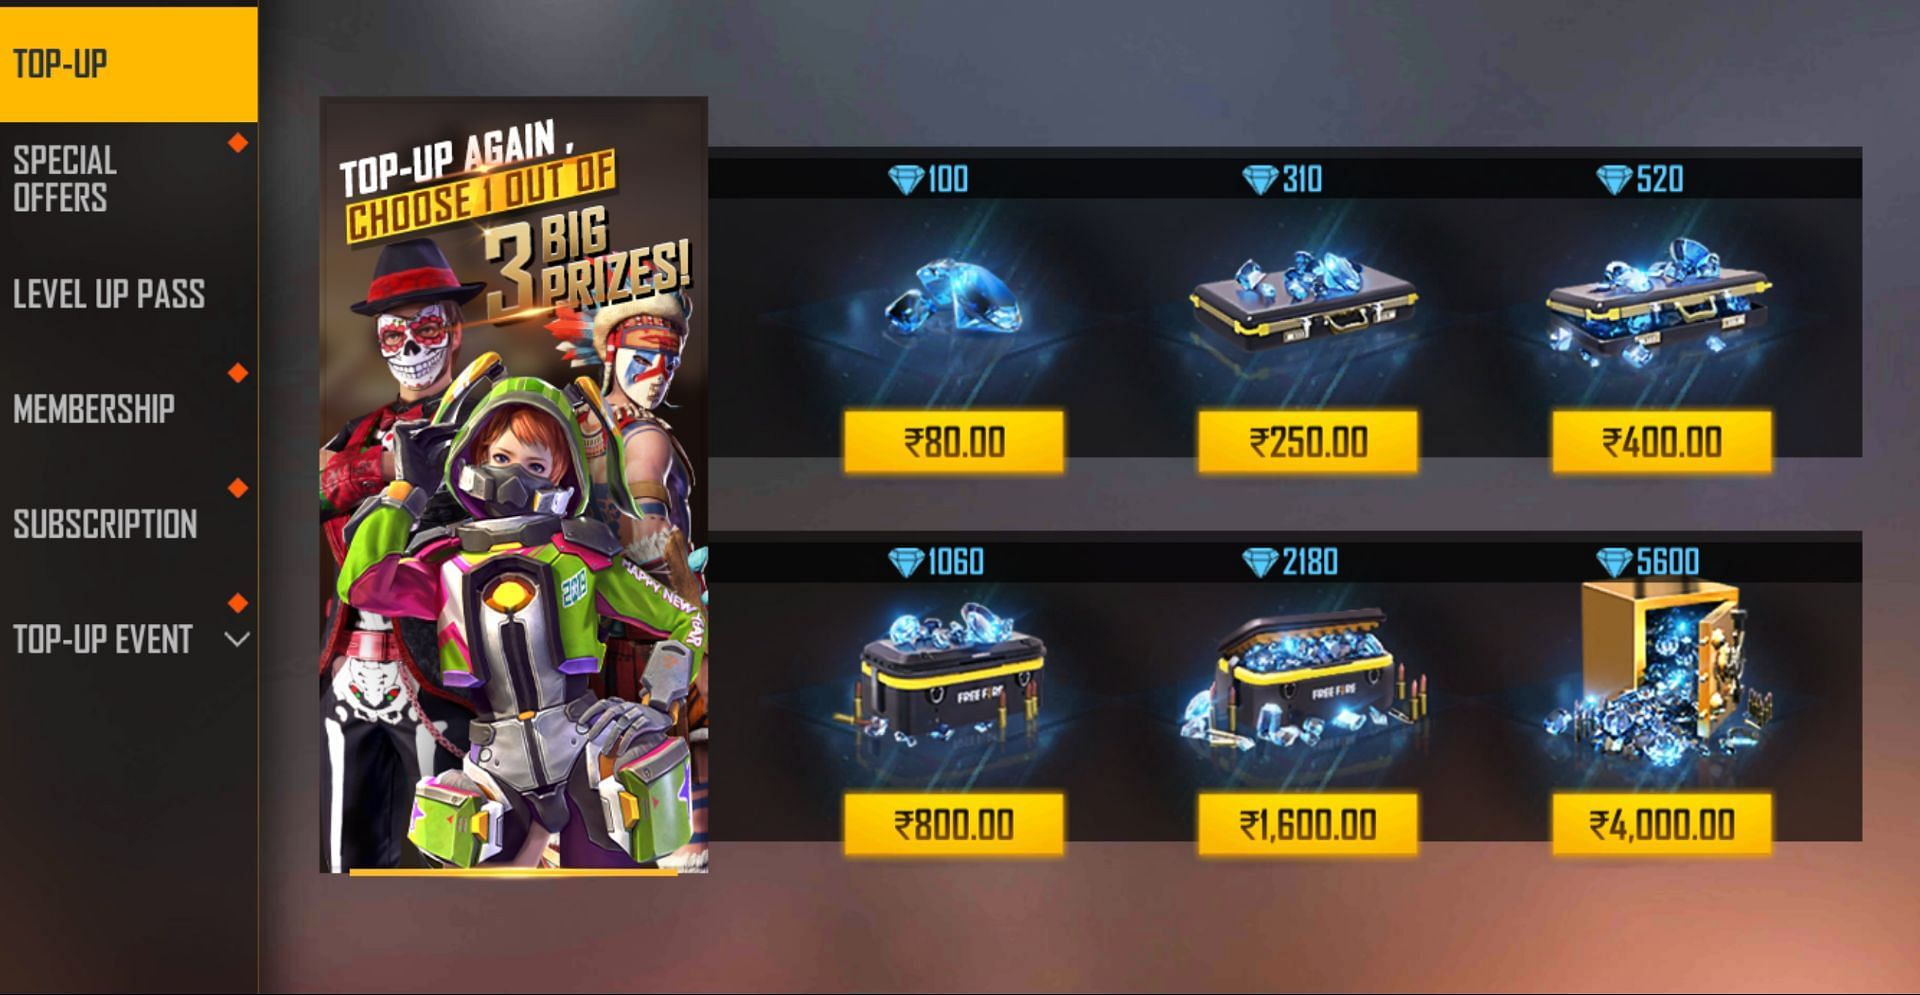 Users should complete the payment for completing the top-up event (Image via Garena)